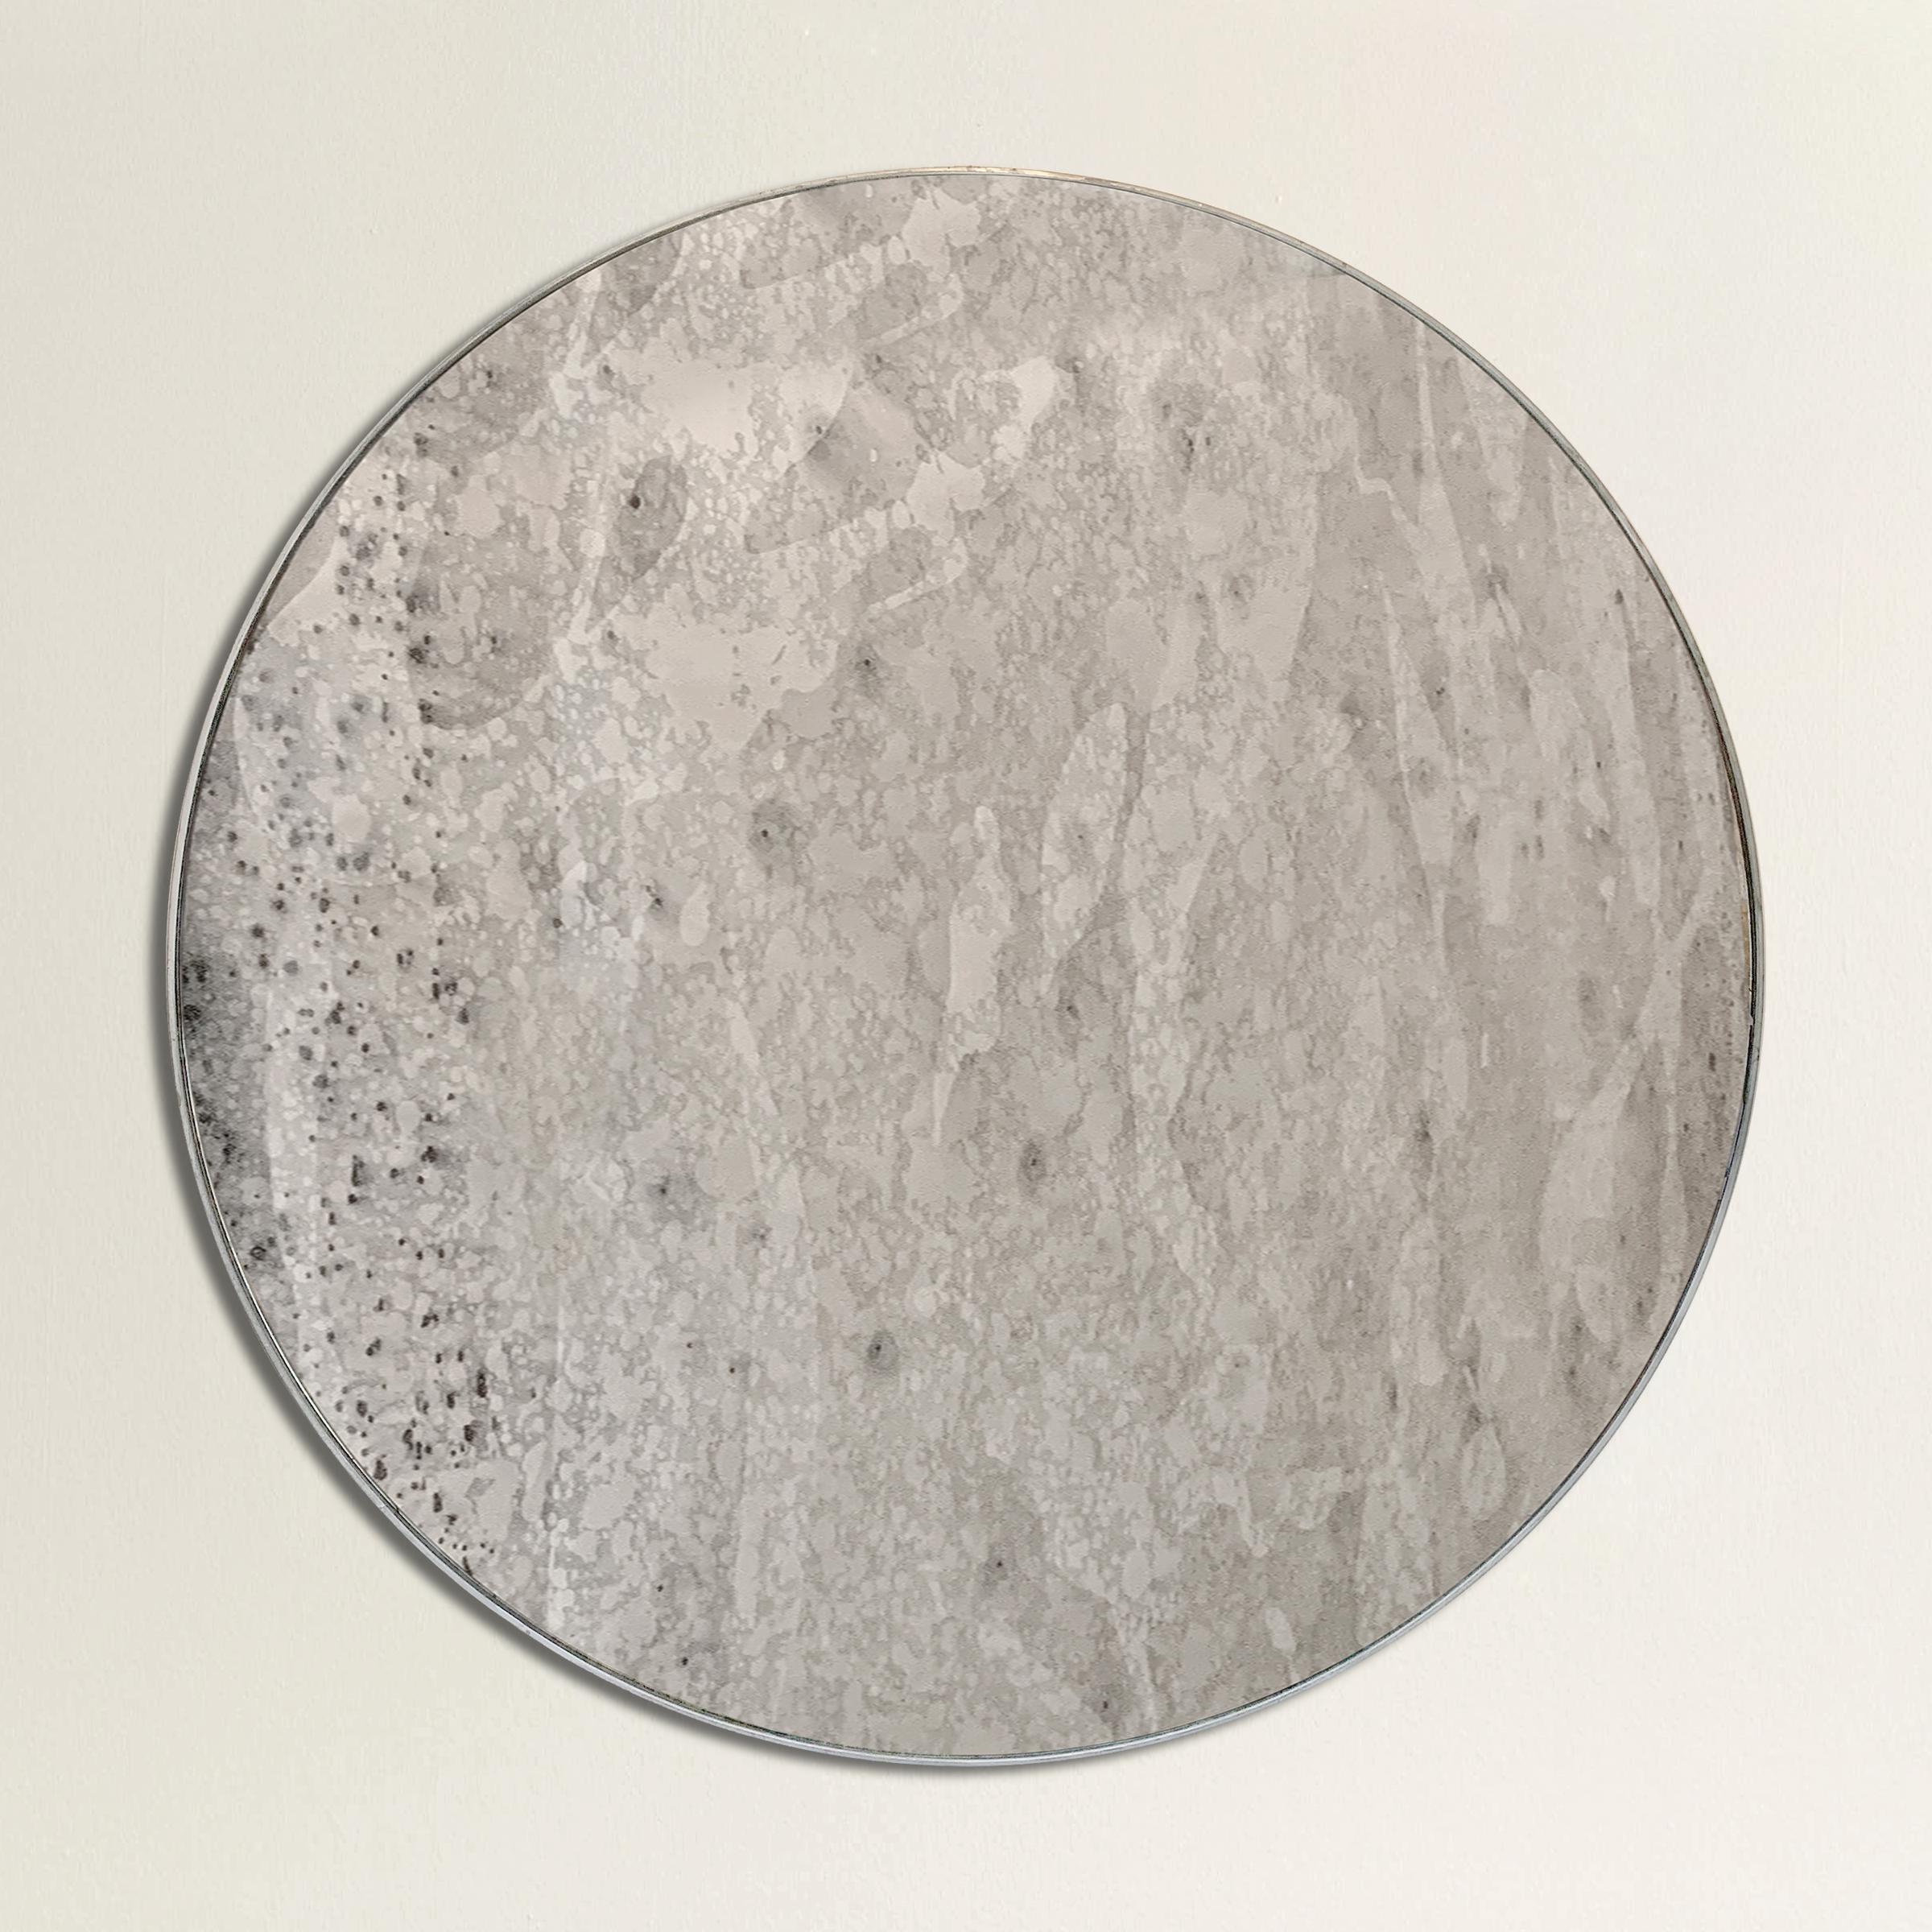 A wonderful large round mirror with a galvanized steel frame and with an antiqued glass that mimics the texture of the moon.